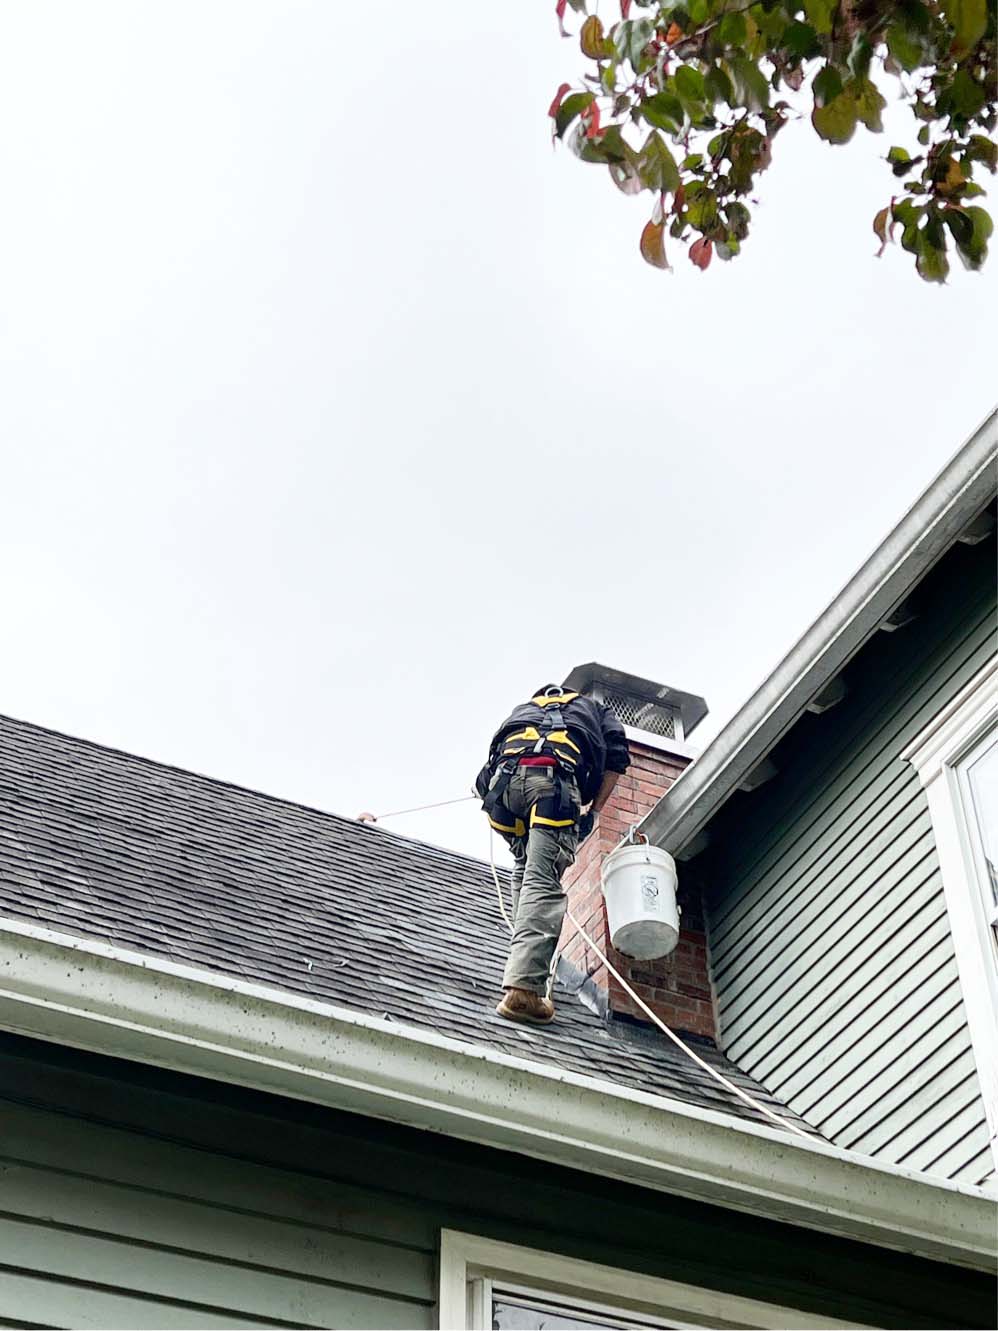 Employee working on a roof wearing protective gear and carrying a white bucket